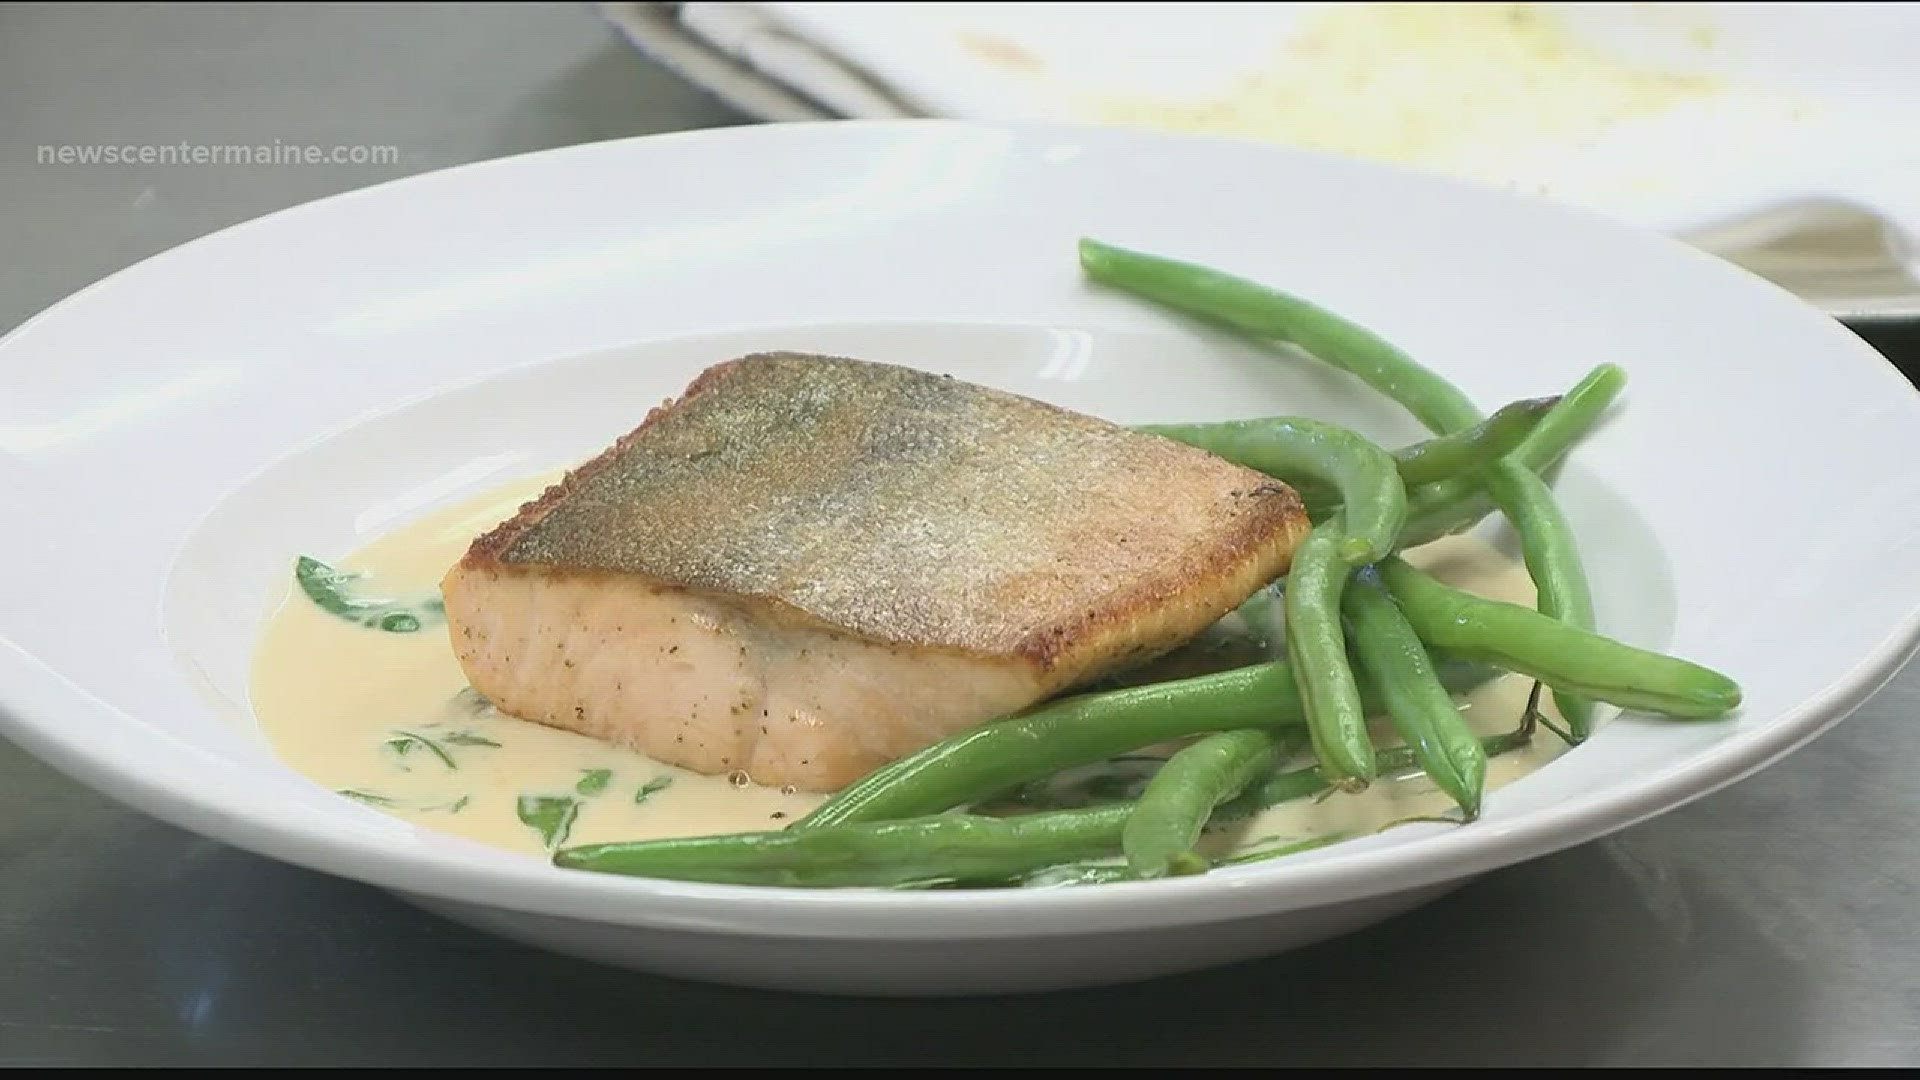 Chef Nick Renzi of Petite Jaqueline shows you how to tame this salmon like fish.